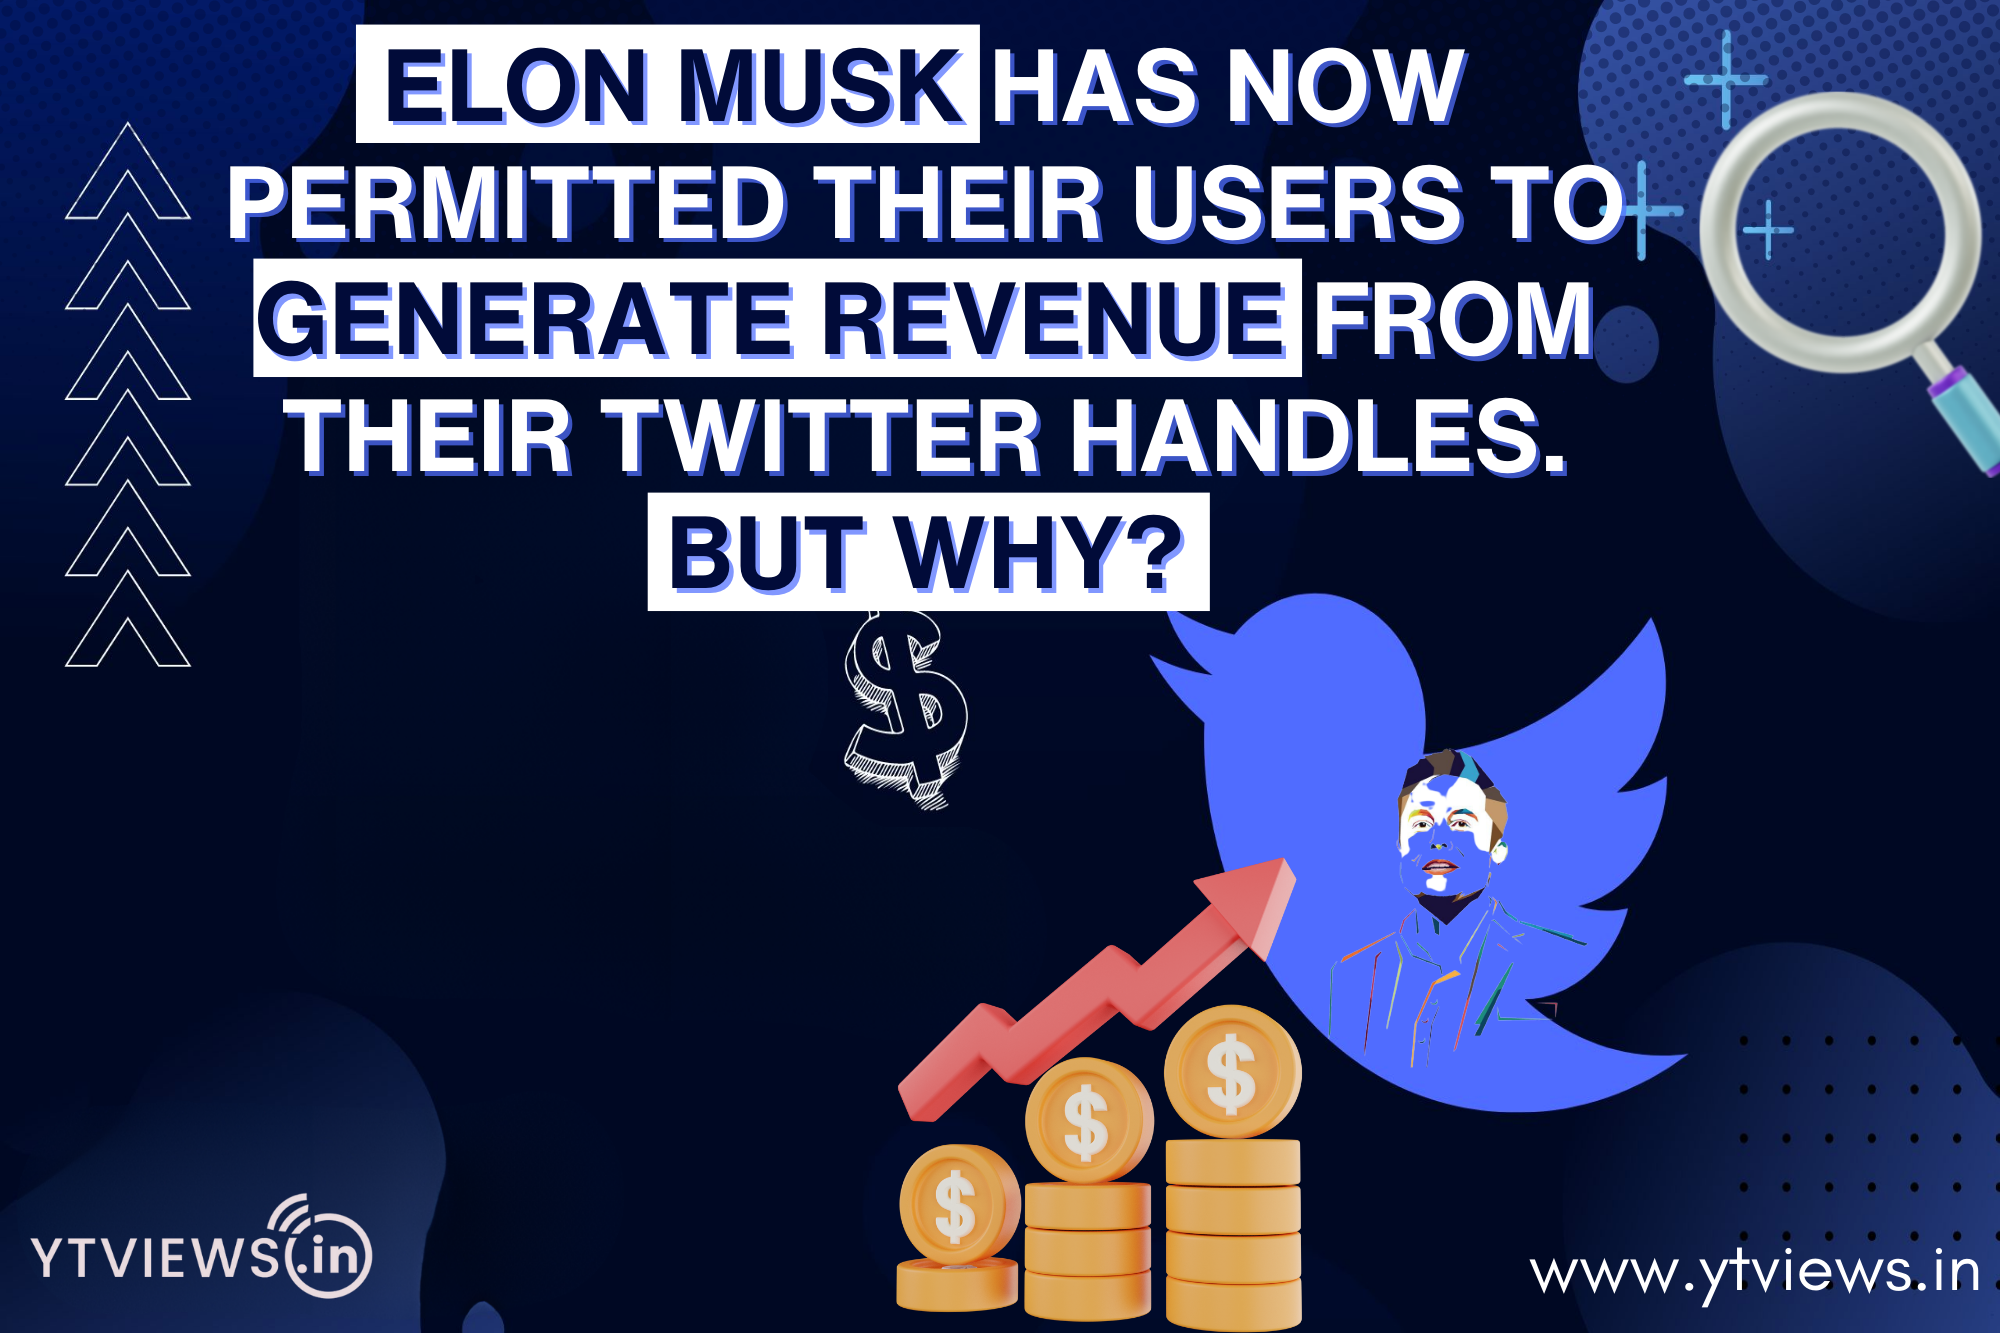 Elon Musk has now permitted their users to generate revenue from their Twitter/X handles. But how?